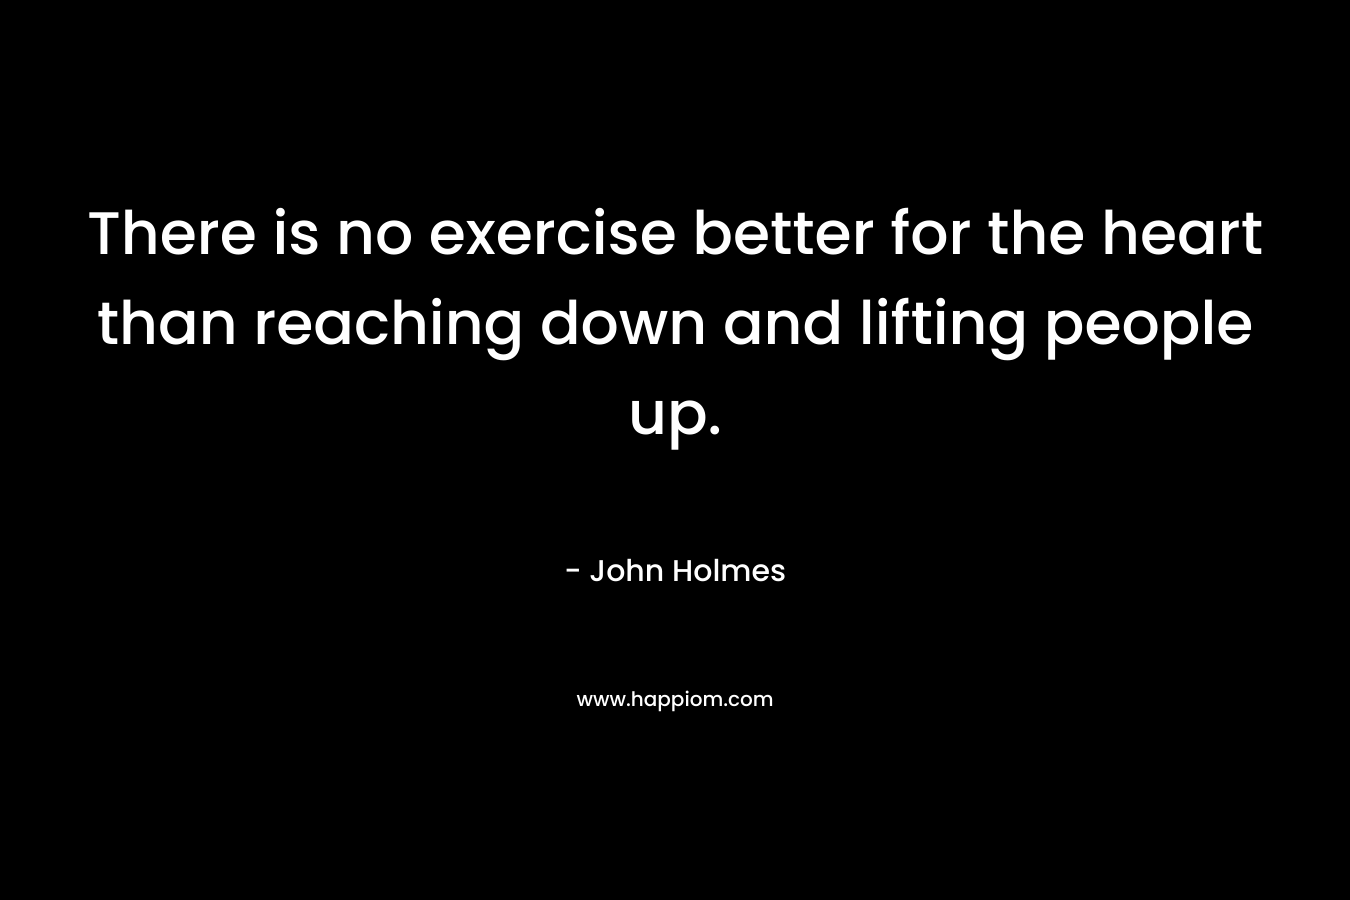 There is no exercise better for the heart than reaching down and lifting people up.